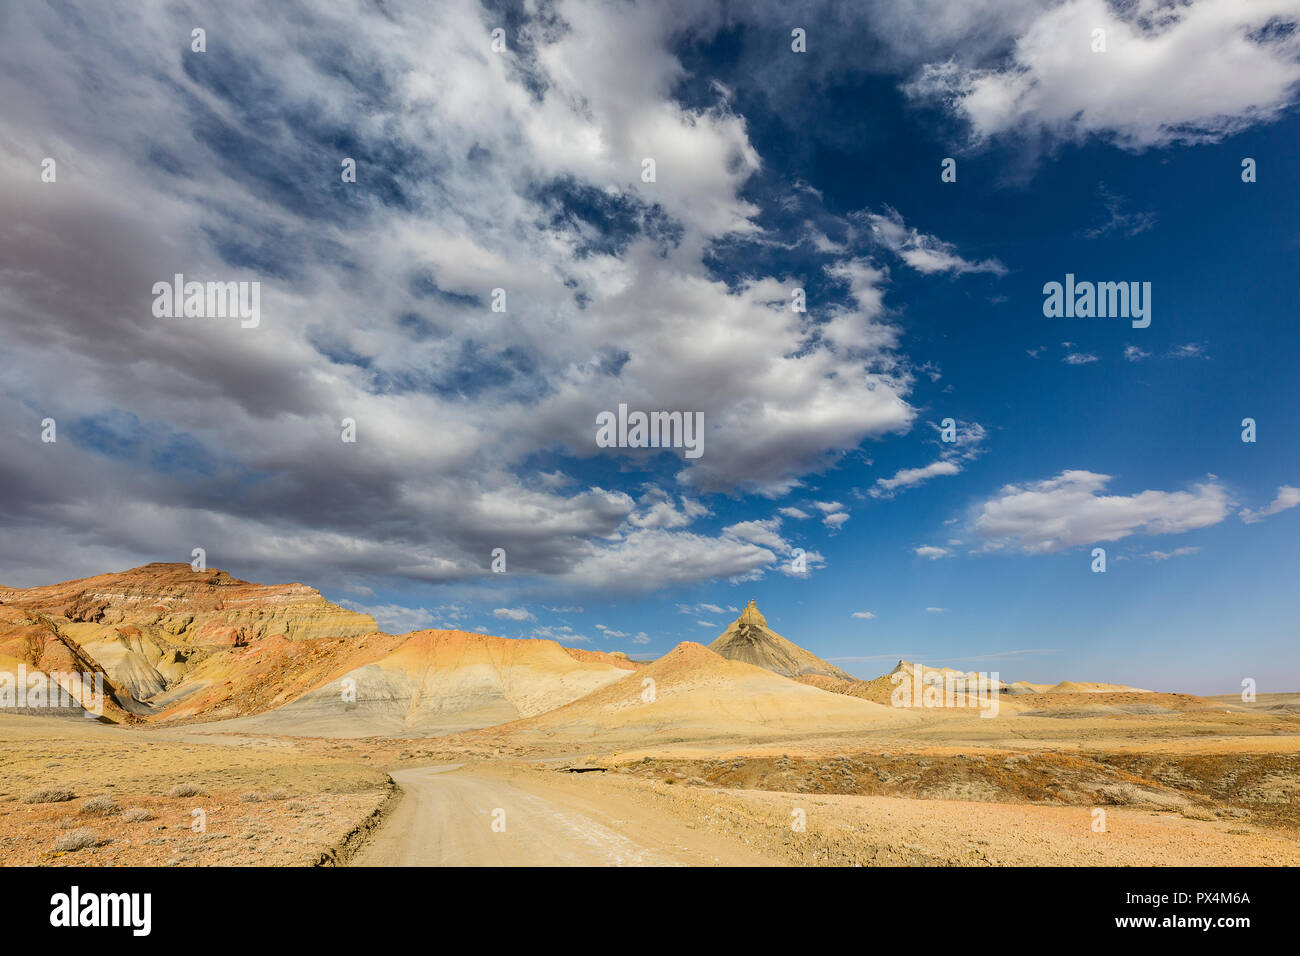 Alstrom Point, AZ, USA. Dirt road towards Alstrom Point under blue skies and scattered clouds. Stock Photo